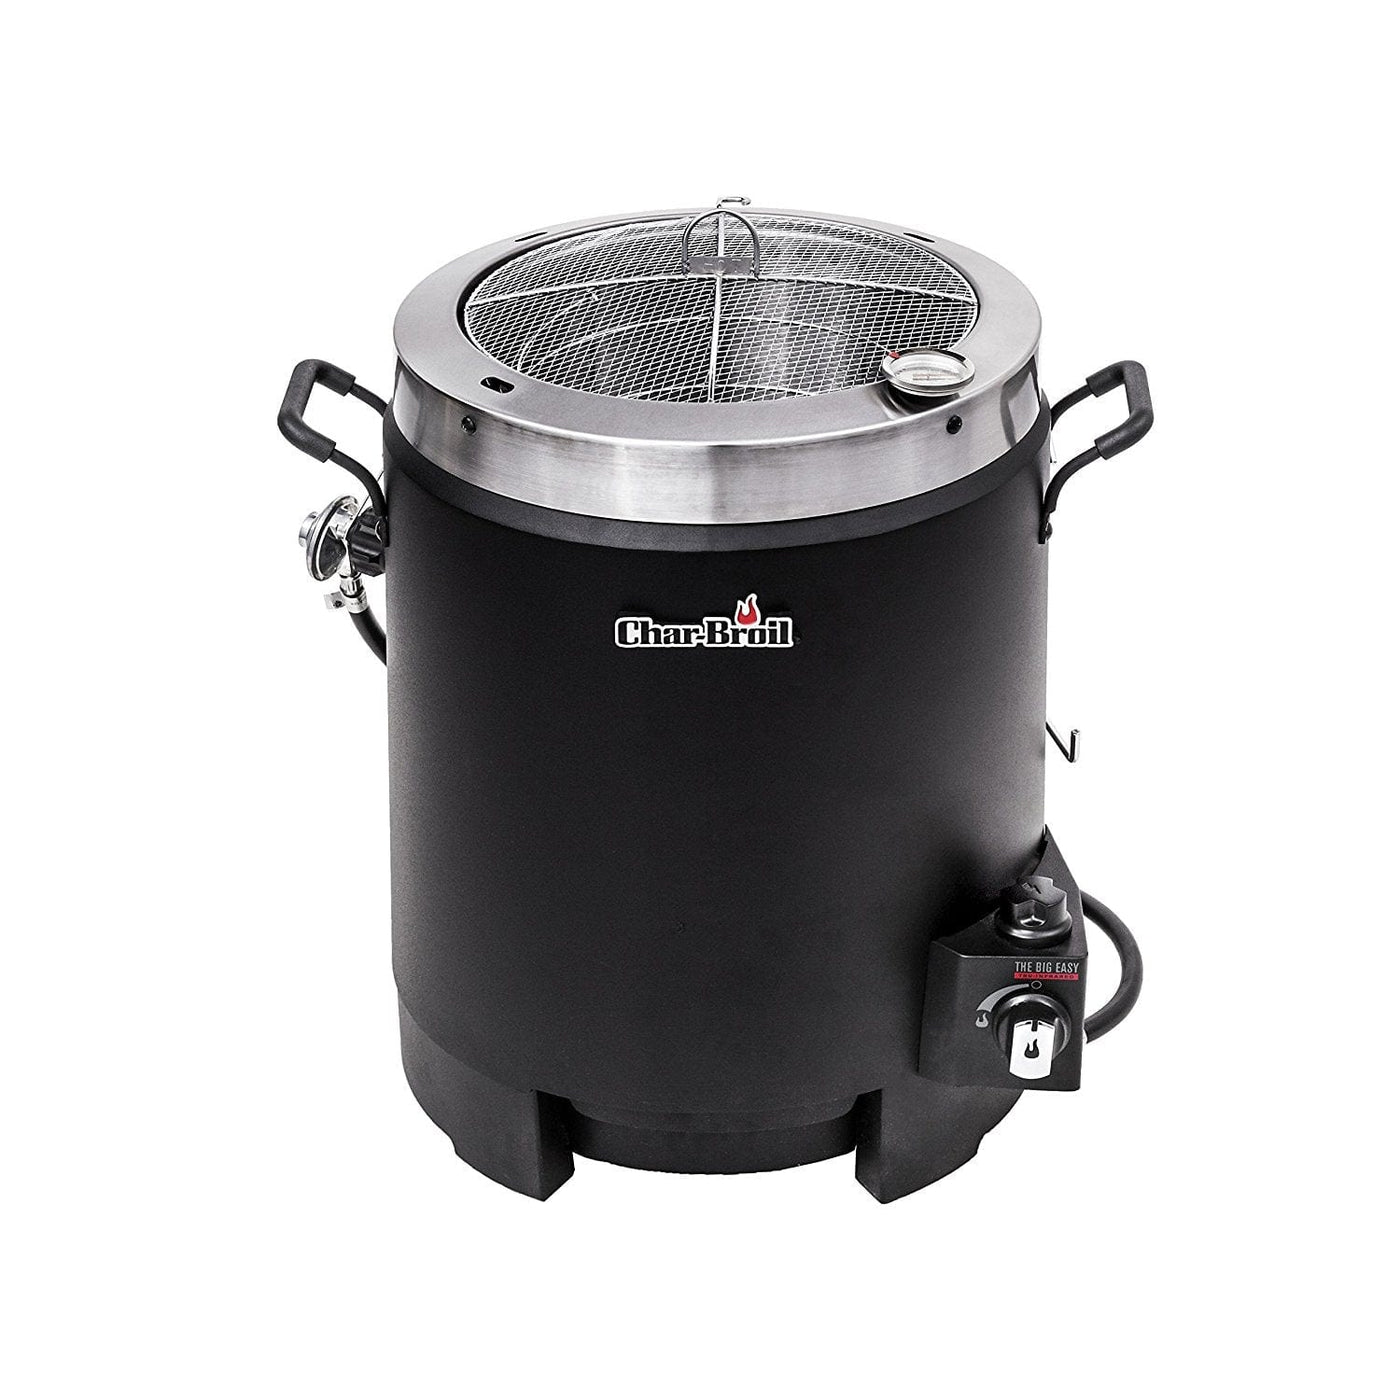 Char-Broil Char-Broil The Big Easy Oil-less Turkey Fryer Camping And Outdoor